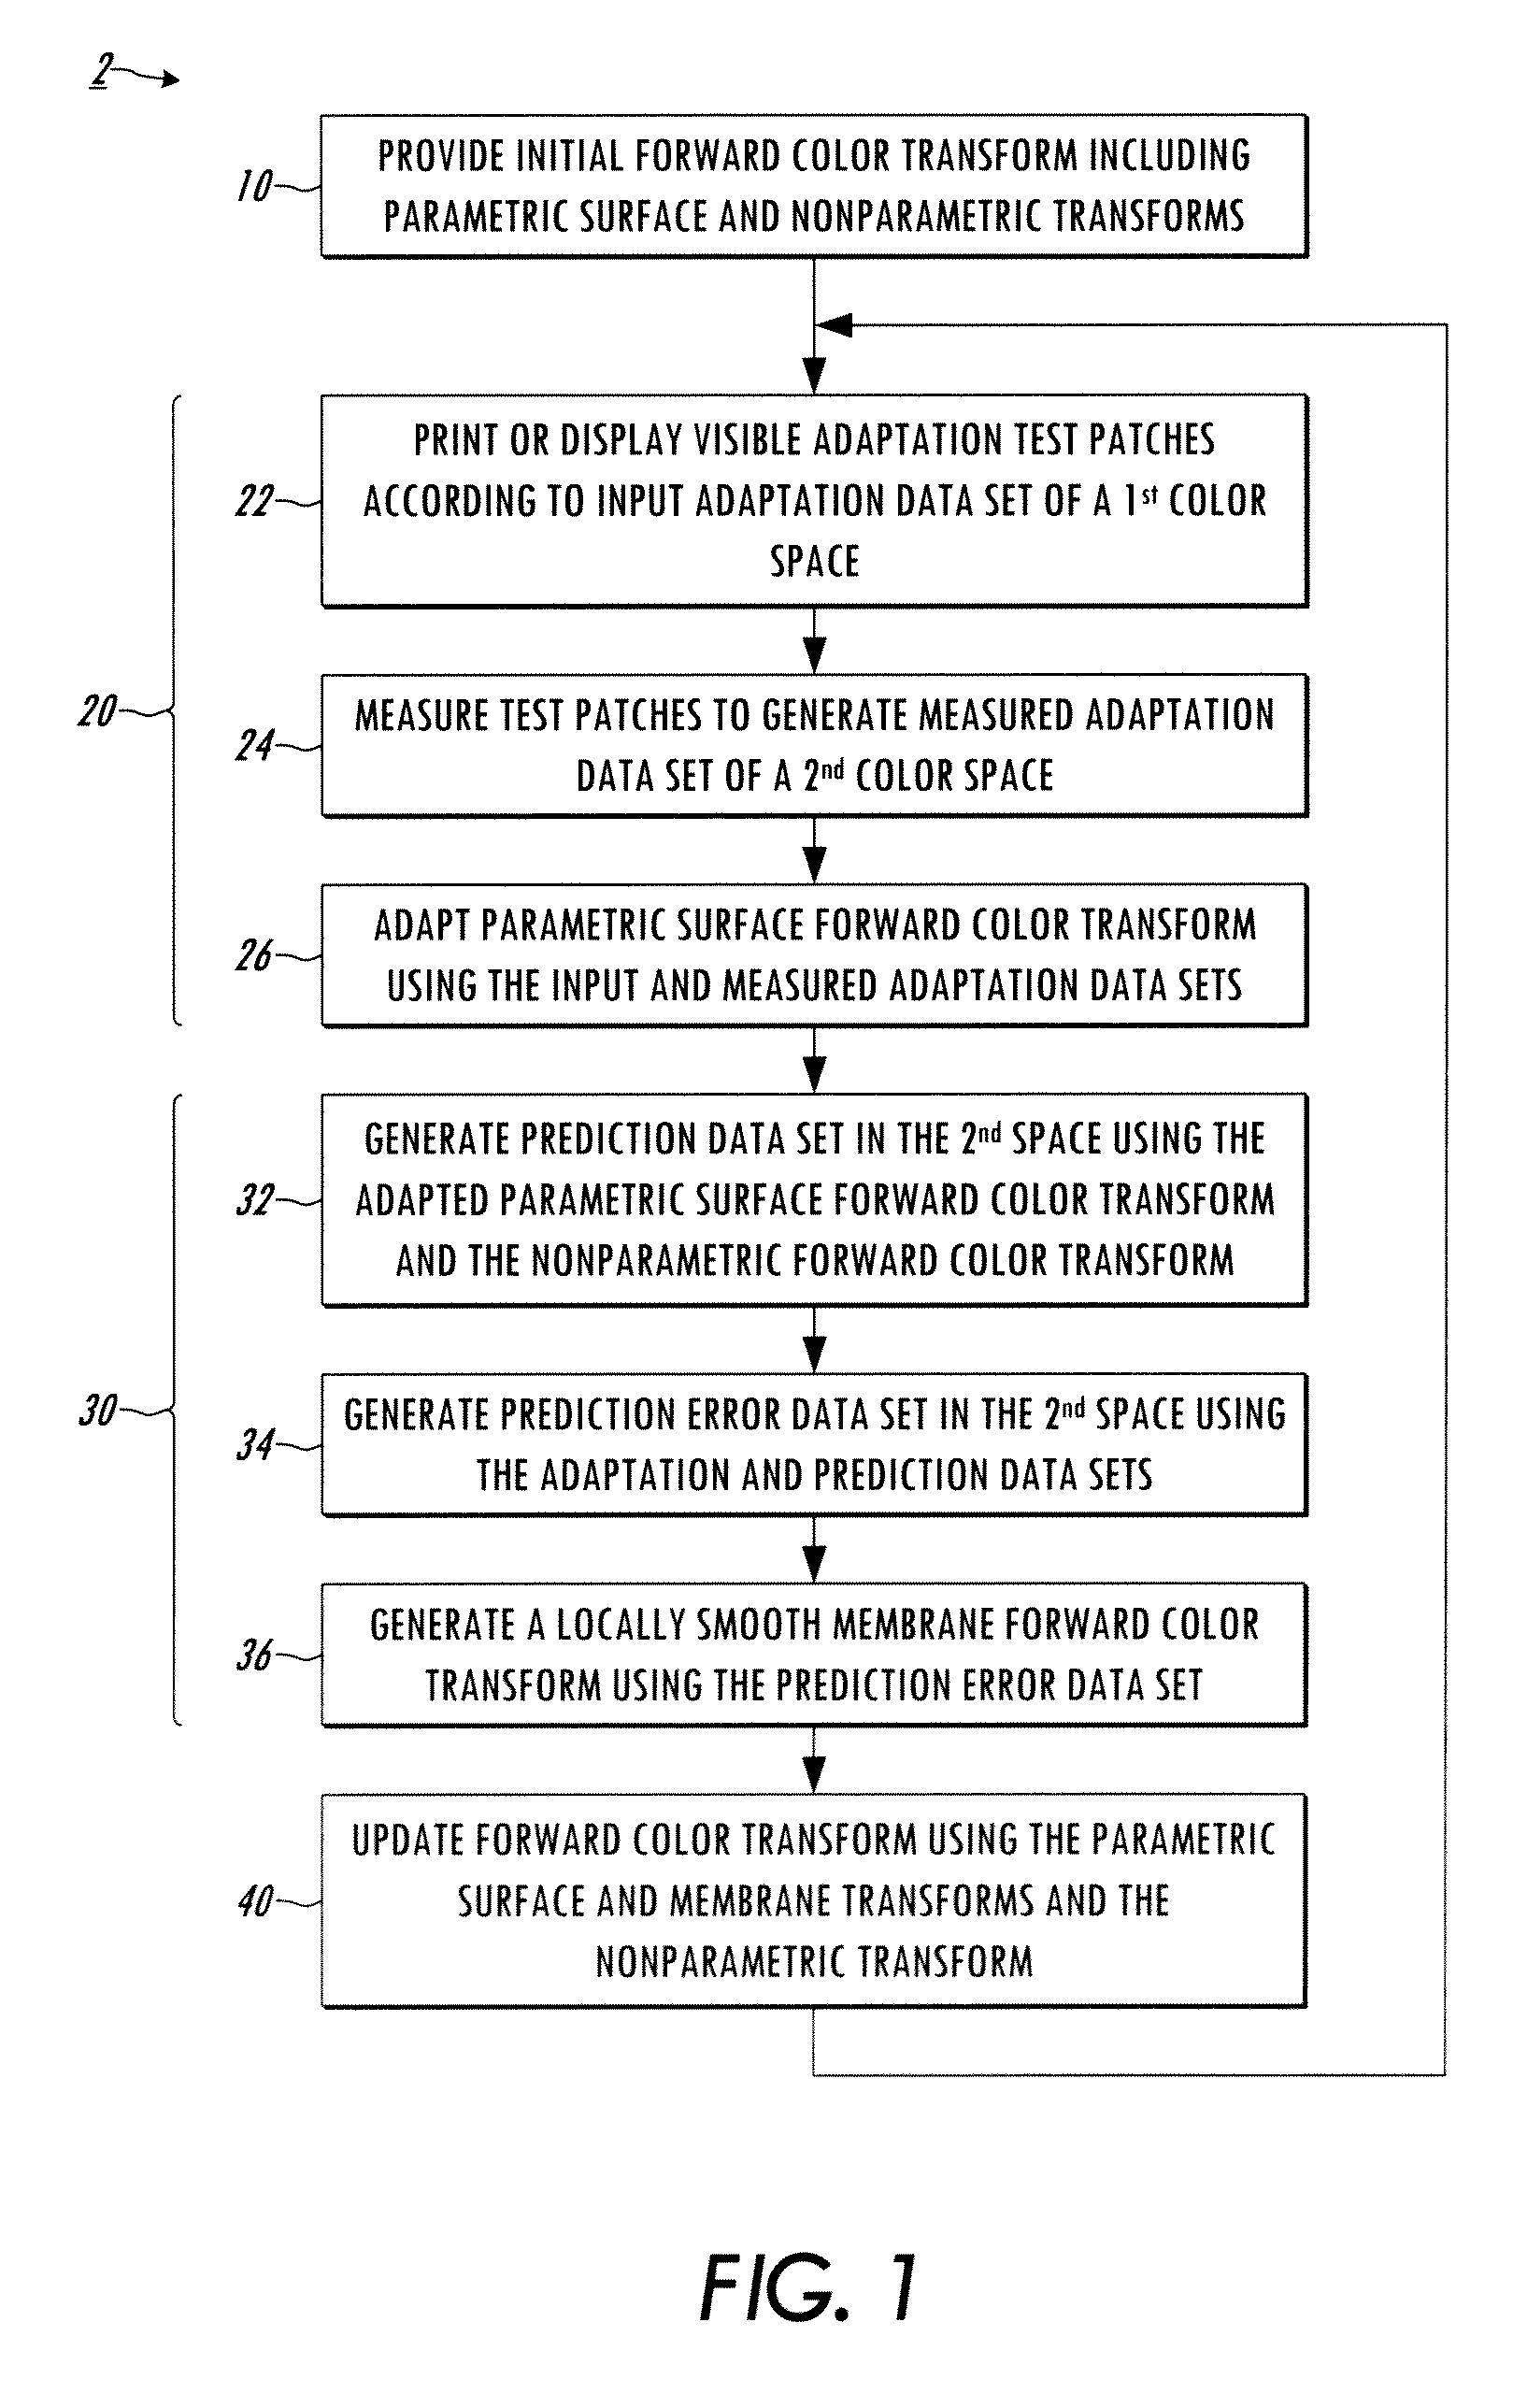 Membrane-based methods and system for color characterization